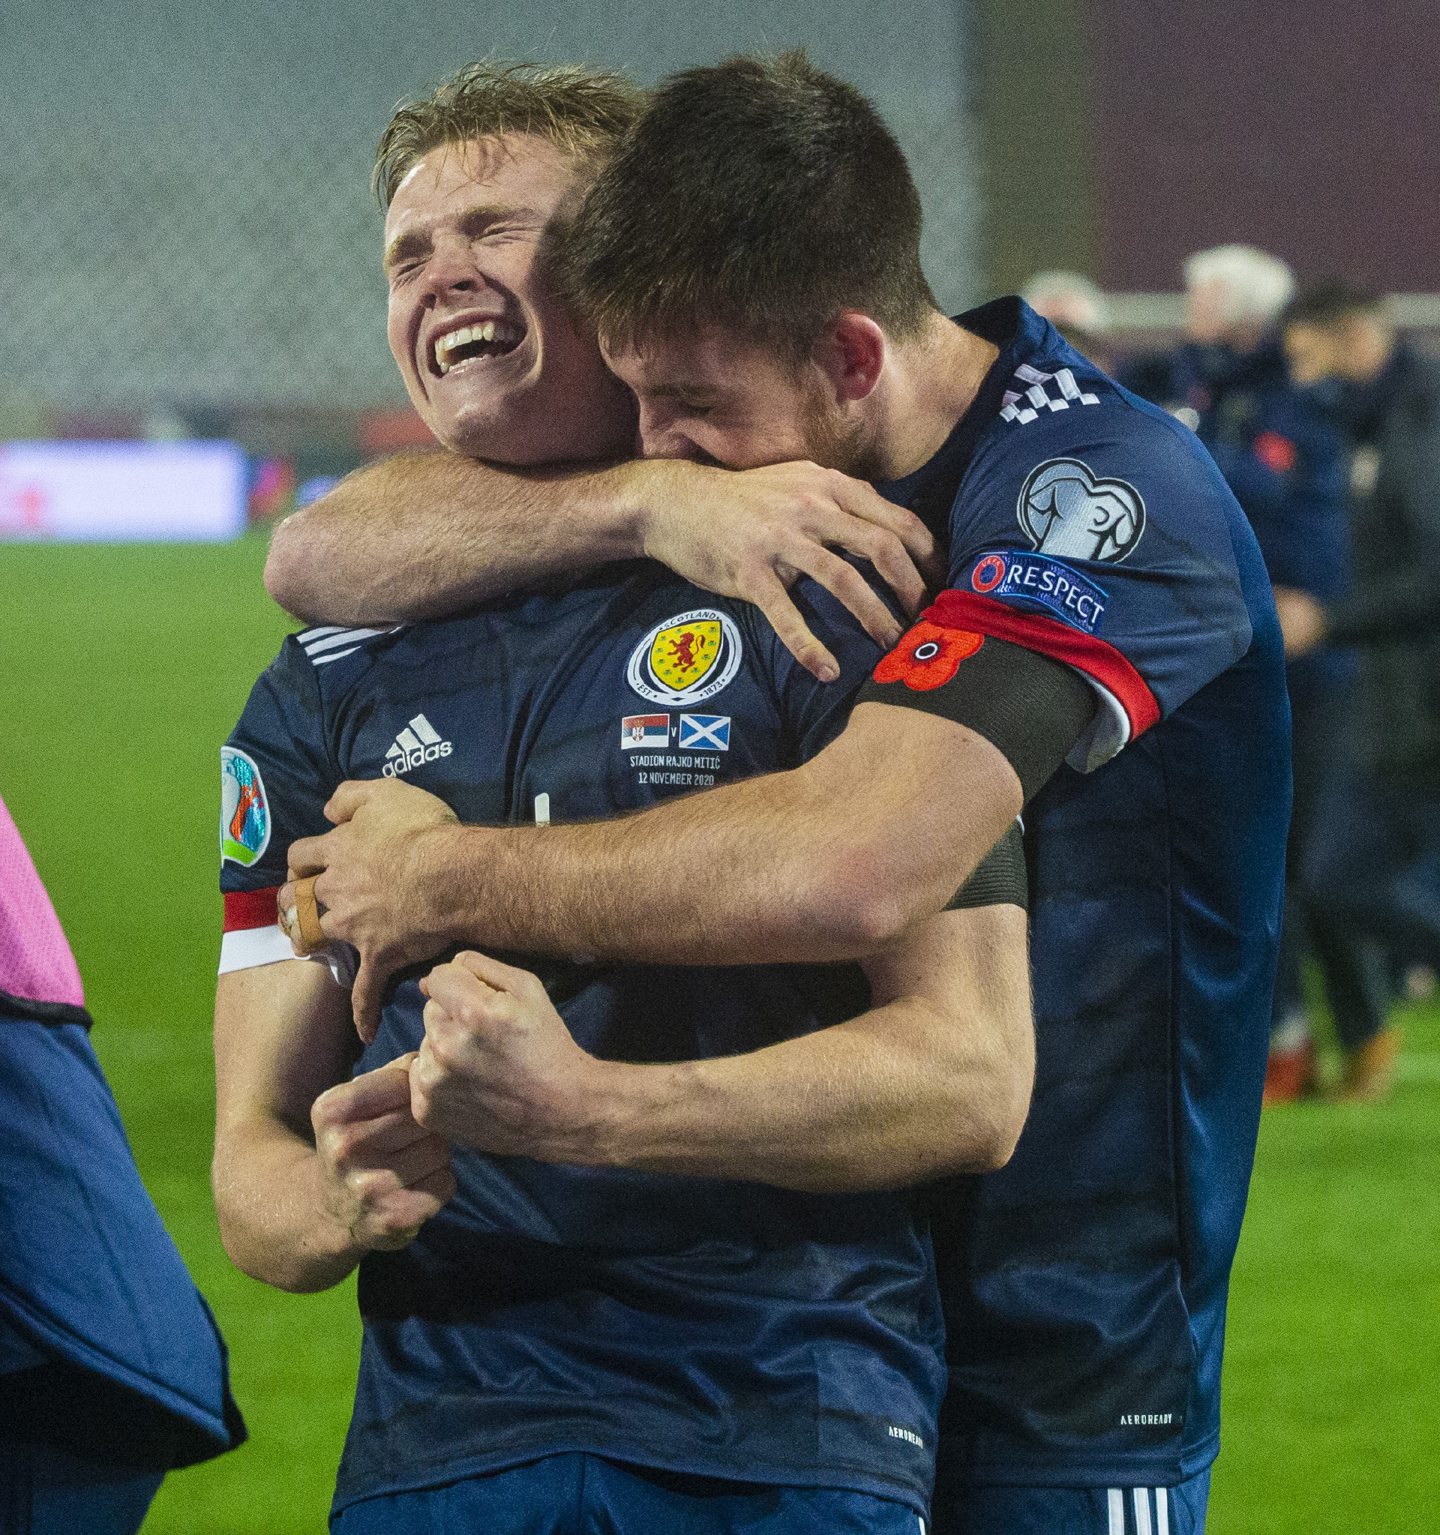 Scotland's Scott McTominay (left) and Declan Gallagher celebrate after David Marshall saves Aleksandar Mitrovic's penalty during the UEFA Euro 2020 Qualifier against Serbia.